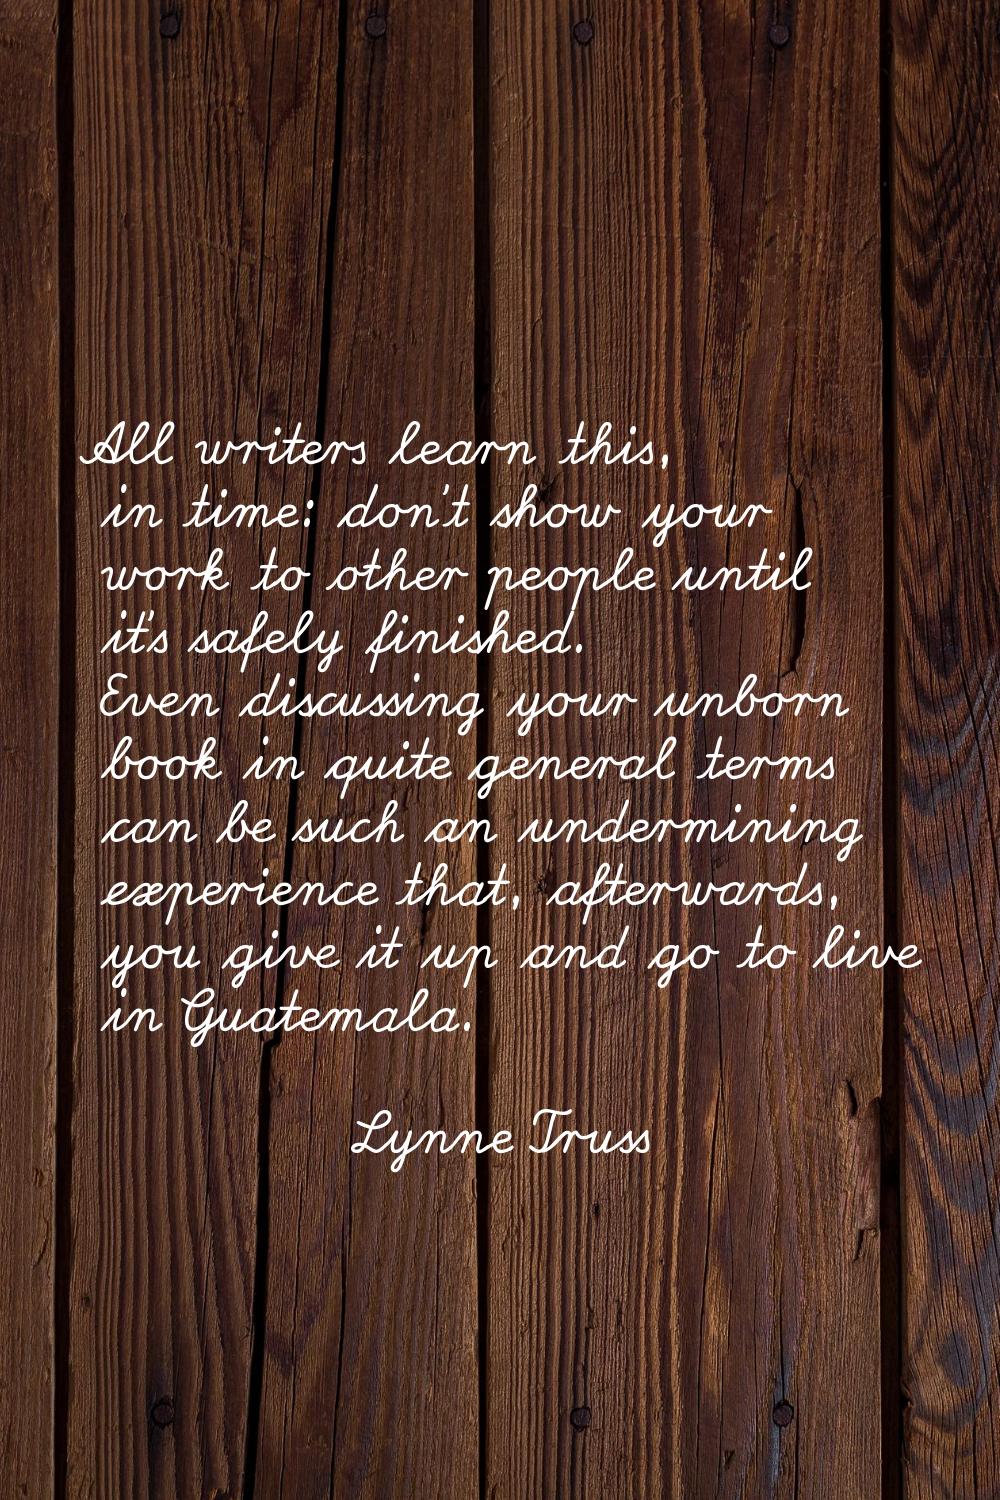 All writers learn this, in time: don't show your work to other people until it's safely finished. E